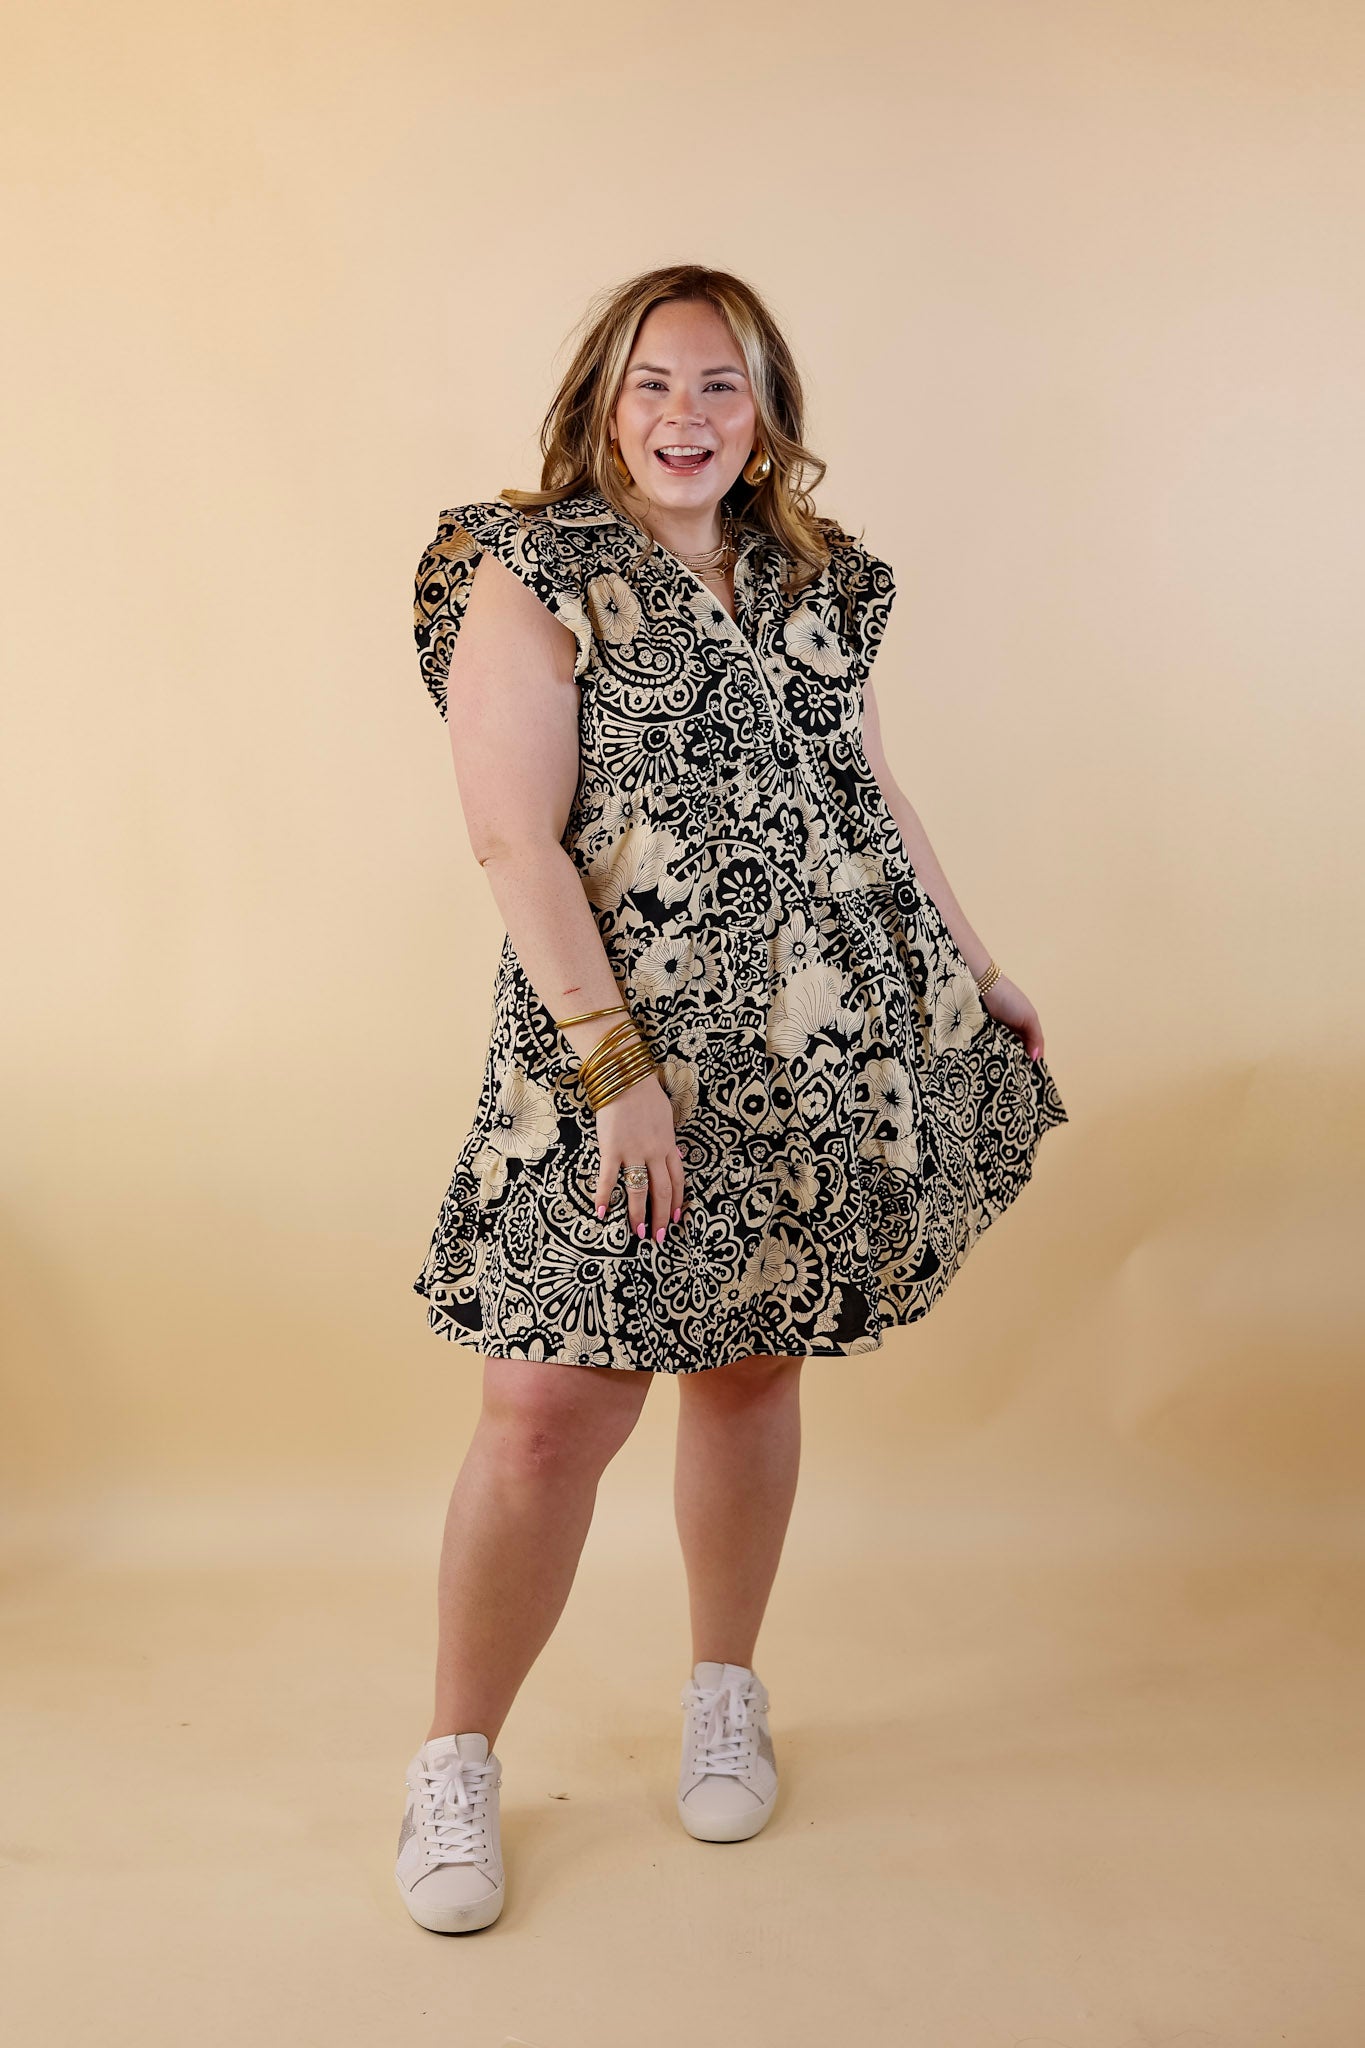 Classy Evenings Floral Print Collared Dress in Beige and Black - Giddy Up Glamour Boutique